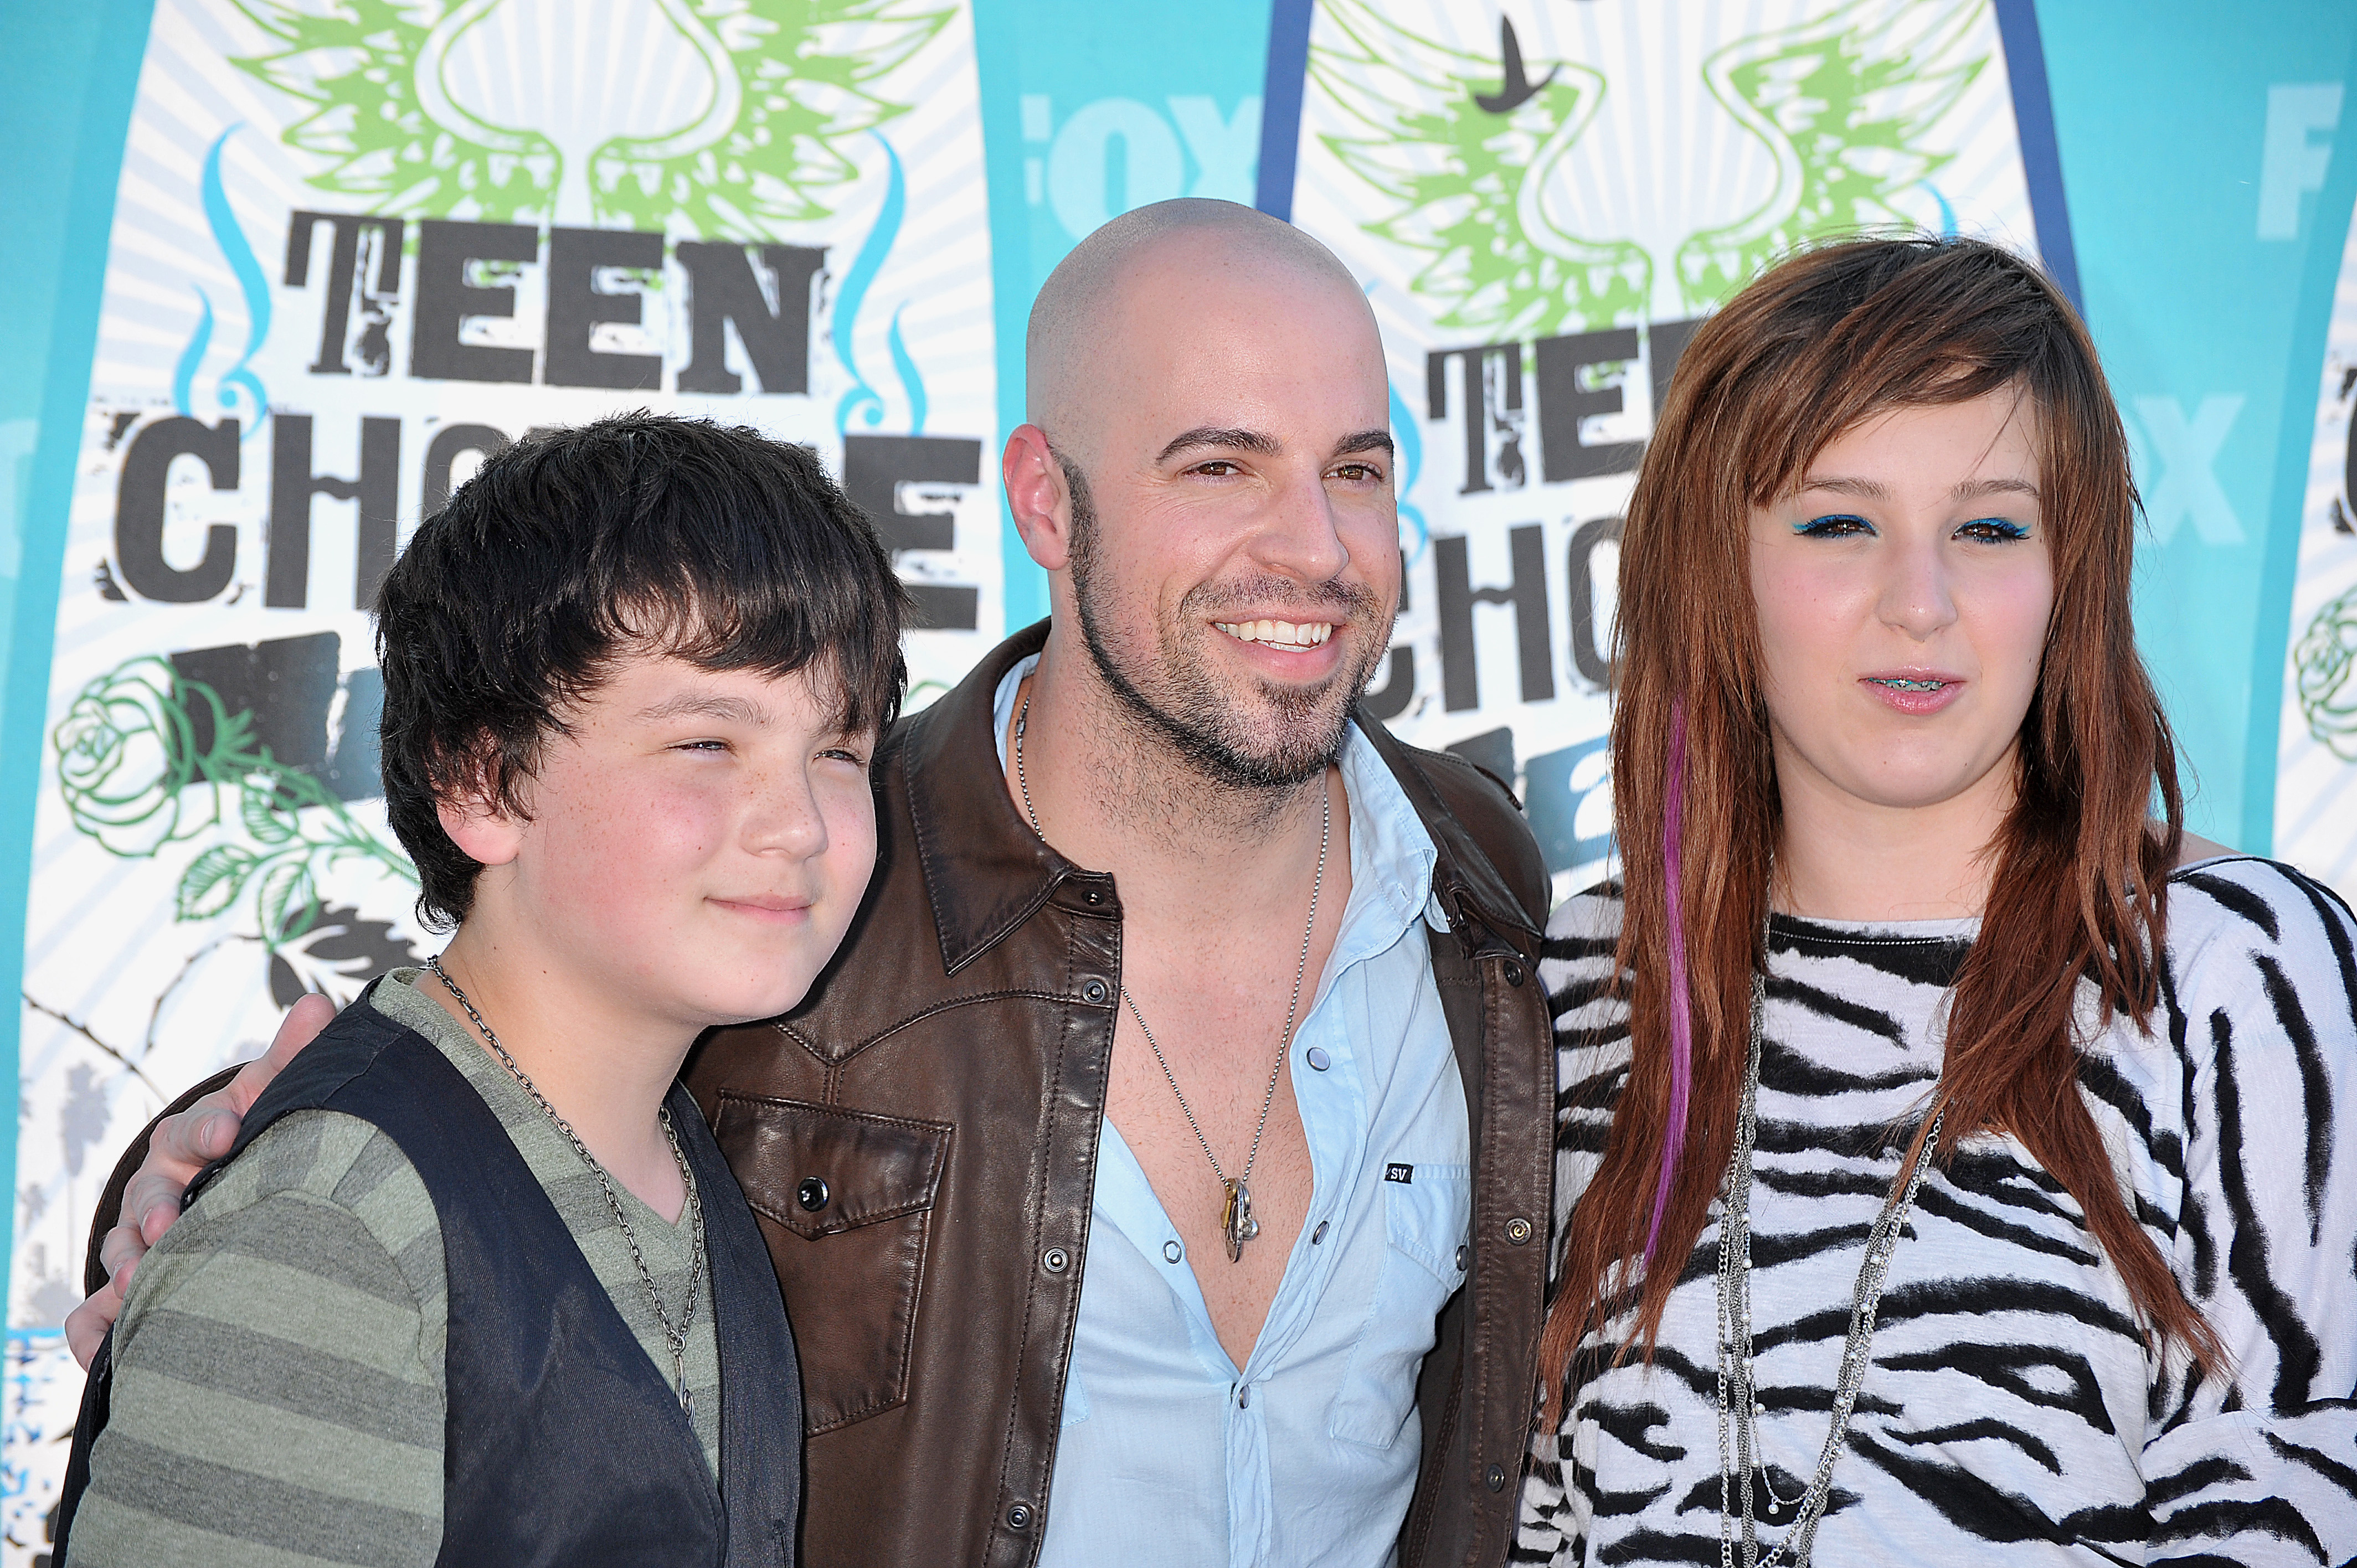 Chris Daughtry and his stepchildren Griffin and Hannah Price arrive at the 2010 Teen Choice Awards on August 8, 2010, in Universal City. | Source: Getty Images